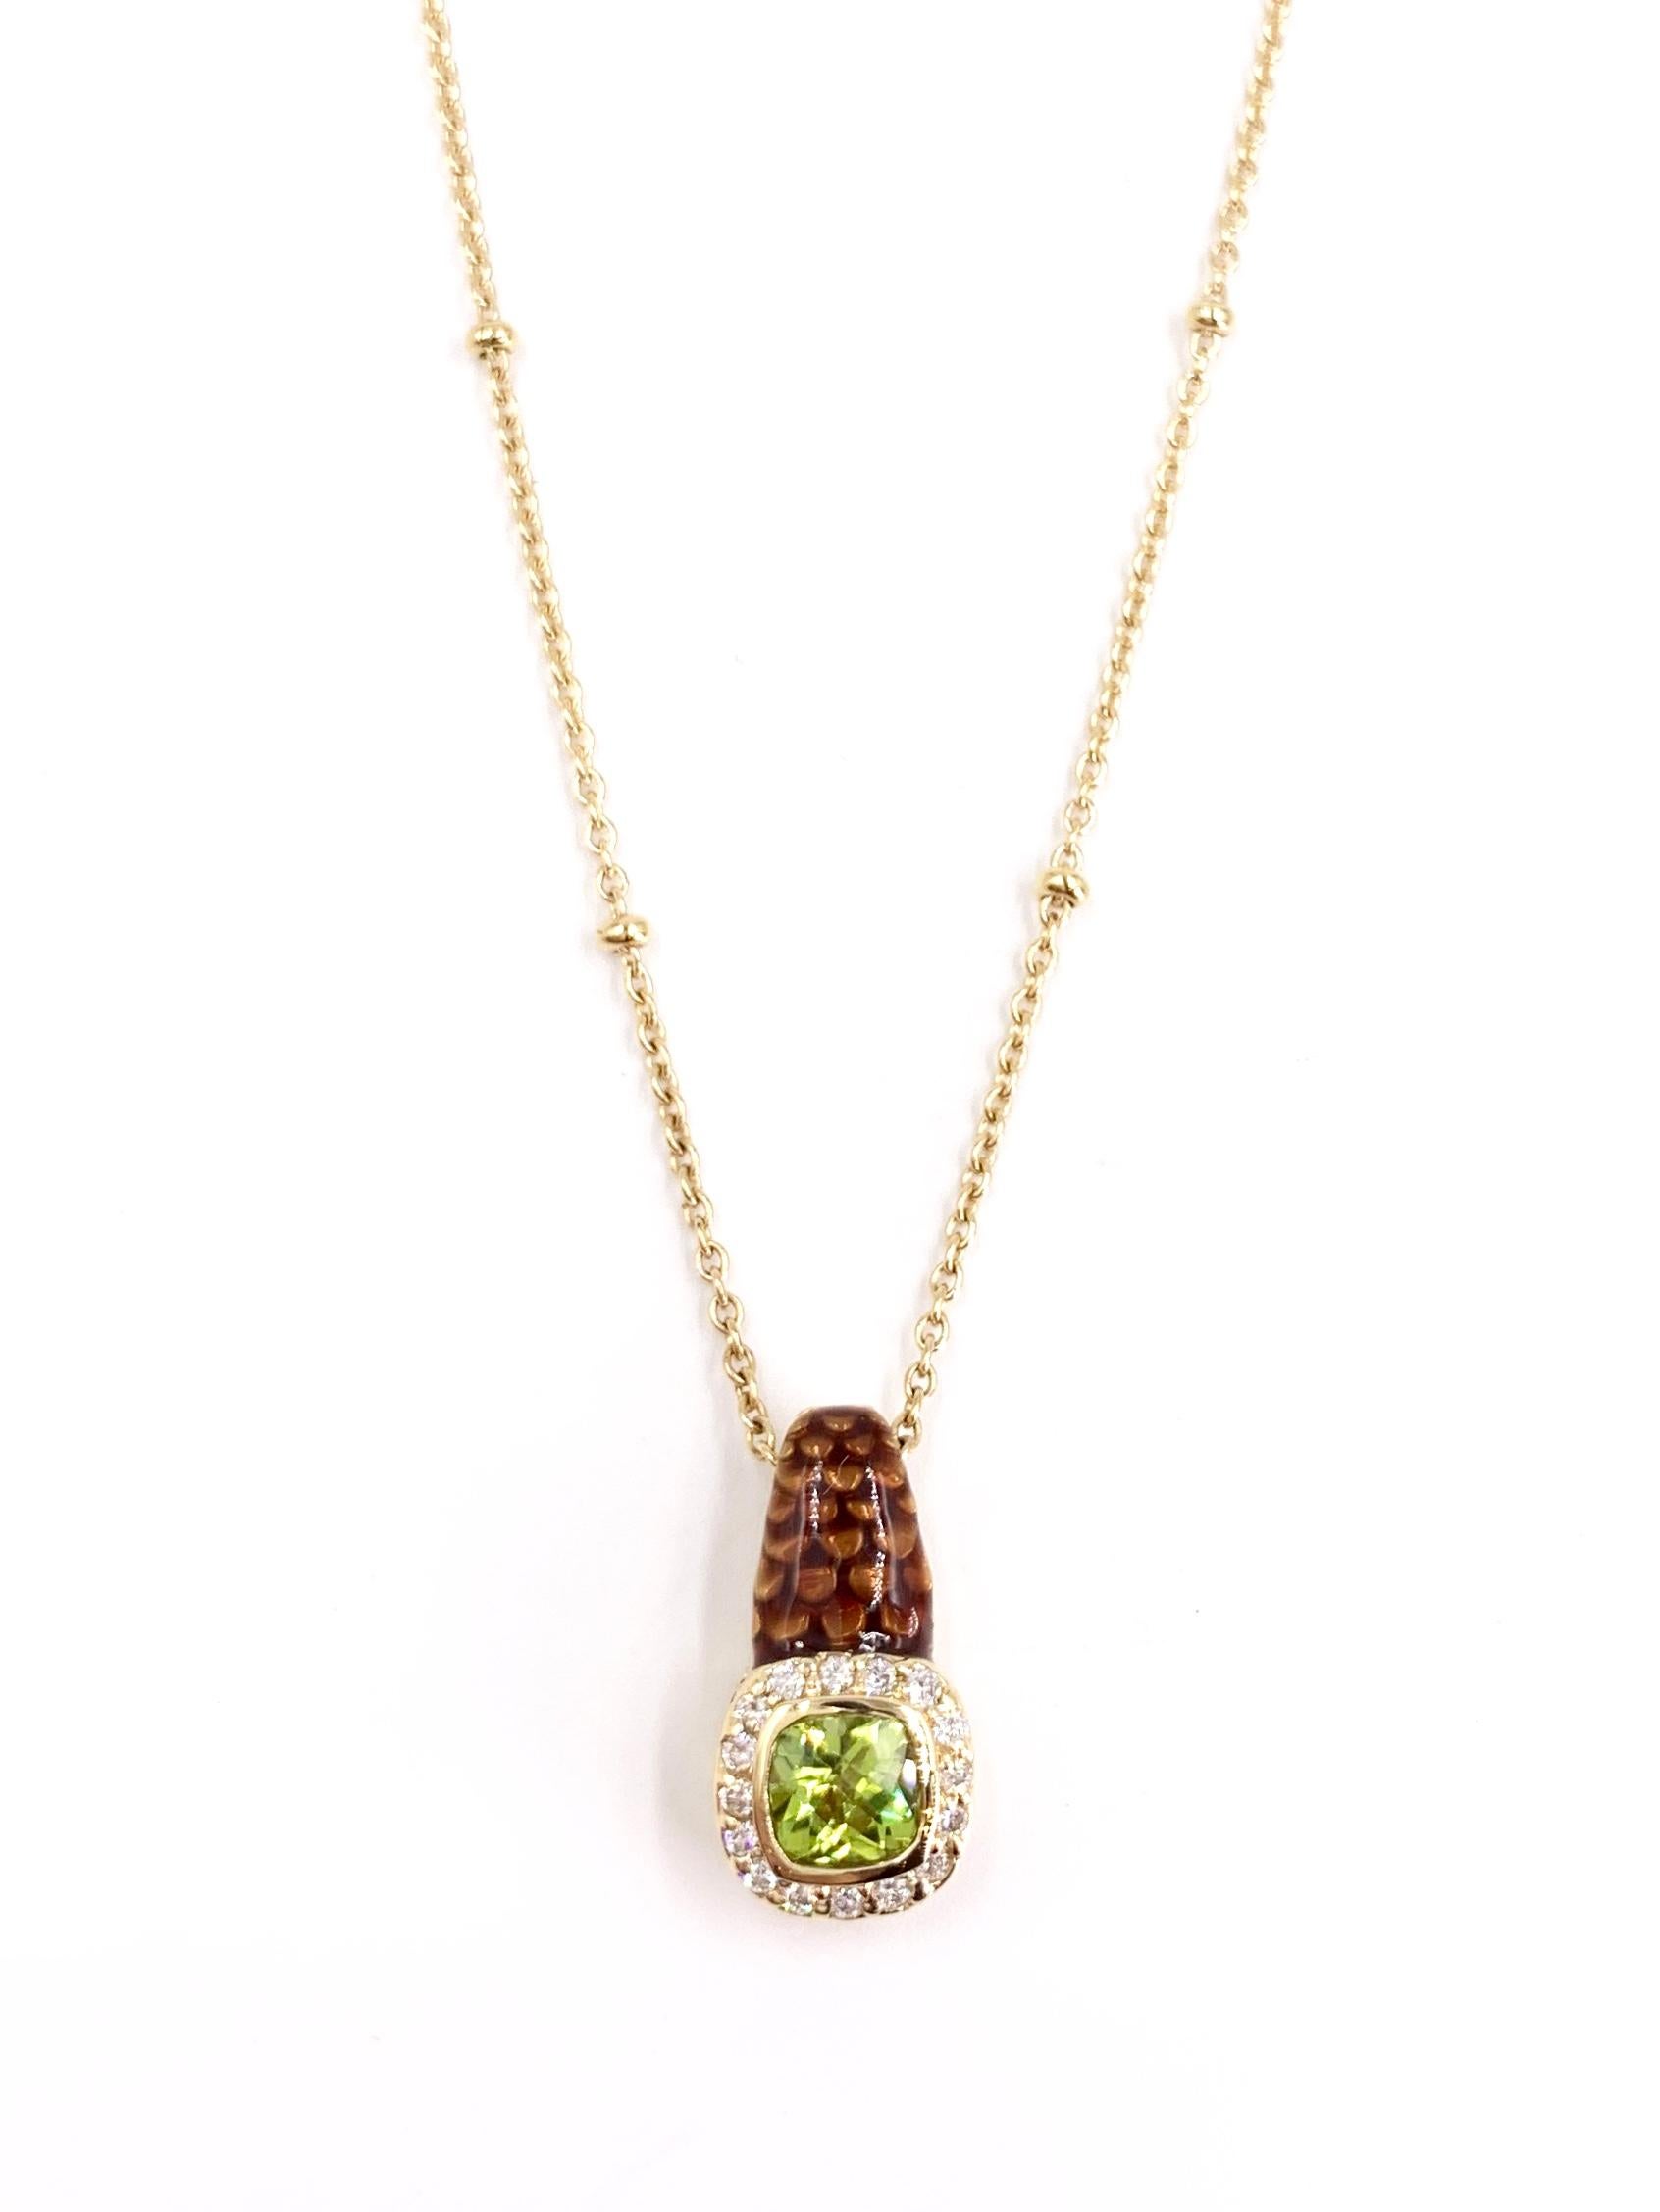 A unique pendant necklace featuring a .95 carat vibrant cushion cut peridot surrounded by .20 carats of white round brilliant diamonds, dropping beautifully from a hand painted brownish-gold enamel bale. Diamond quality is approximately G-H color,